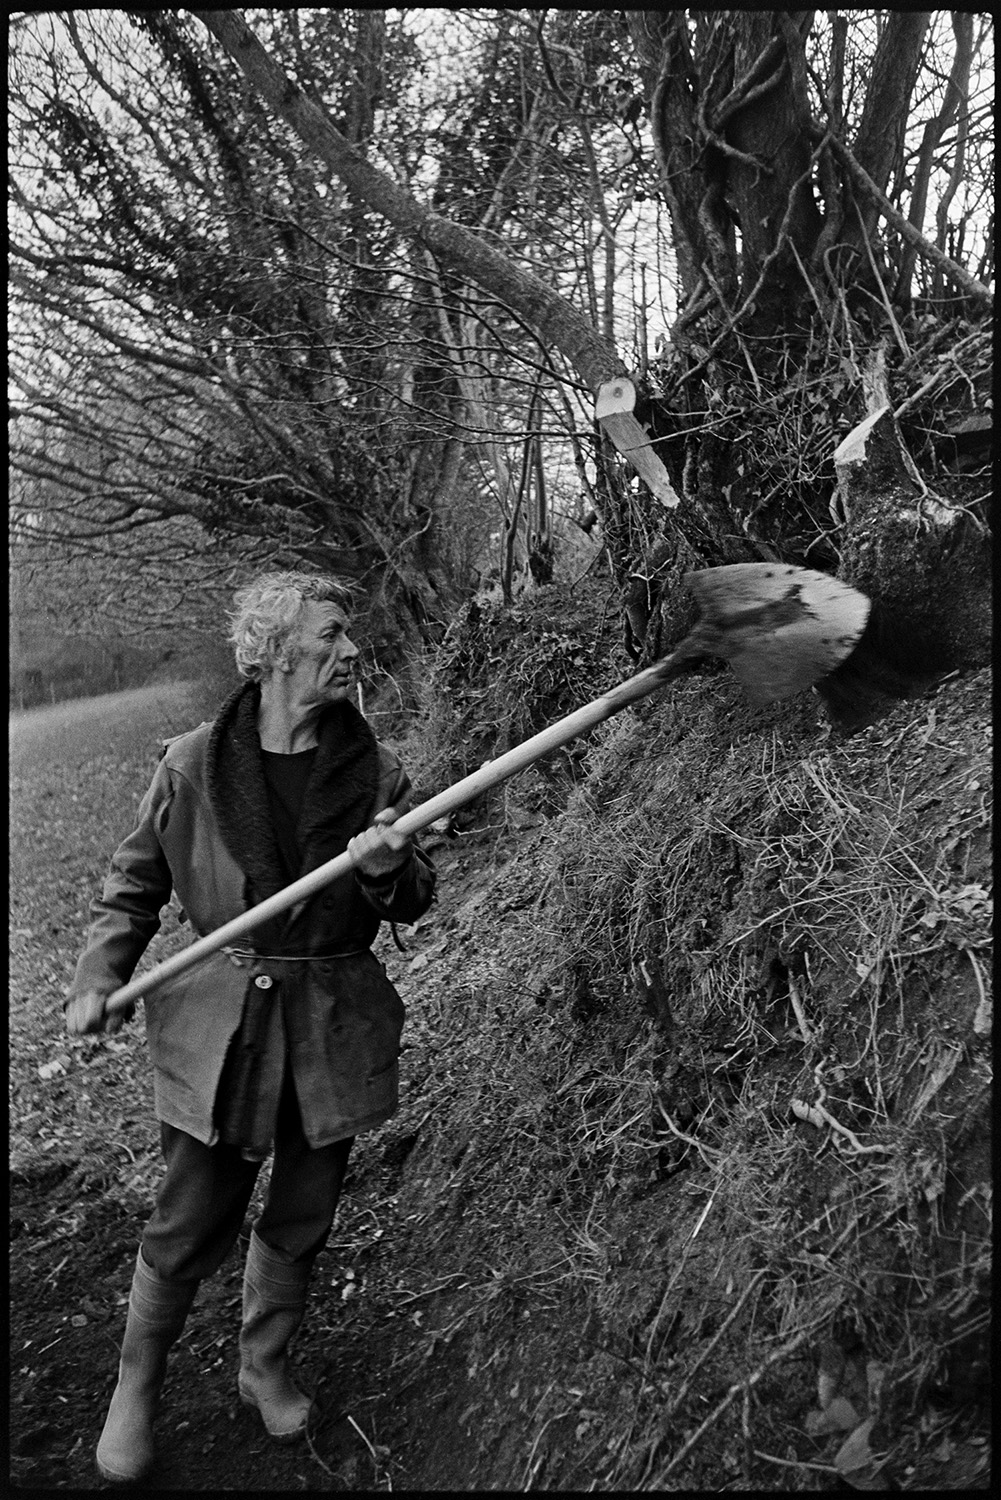 Man clatting, building up old hedgebank, sitting in shelter with dog. 
[Fred Moule clatting or building up a hedgerow with turf, using a spade, at Woolridge, Dolton. Branches in the hedge have been trimmed.]